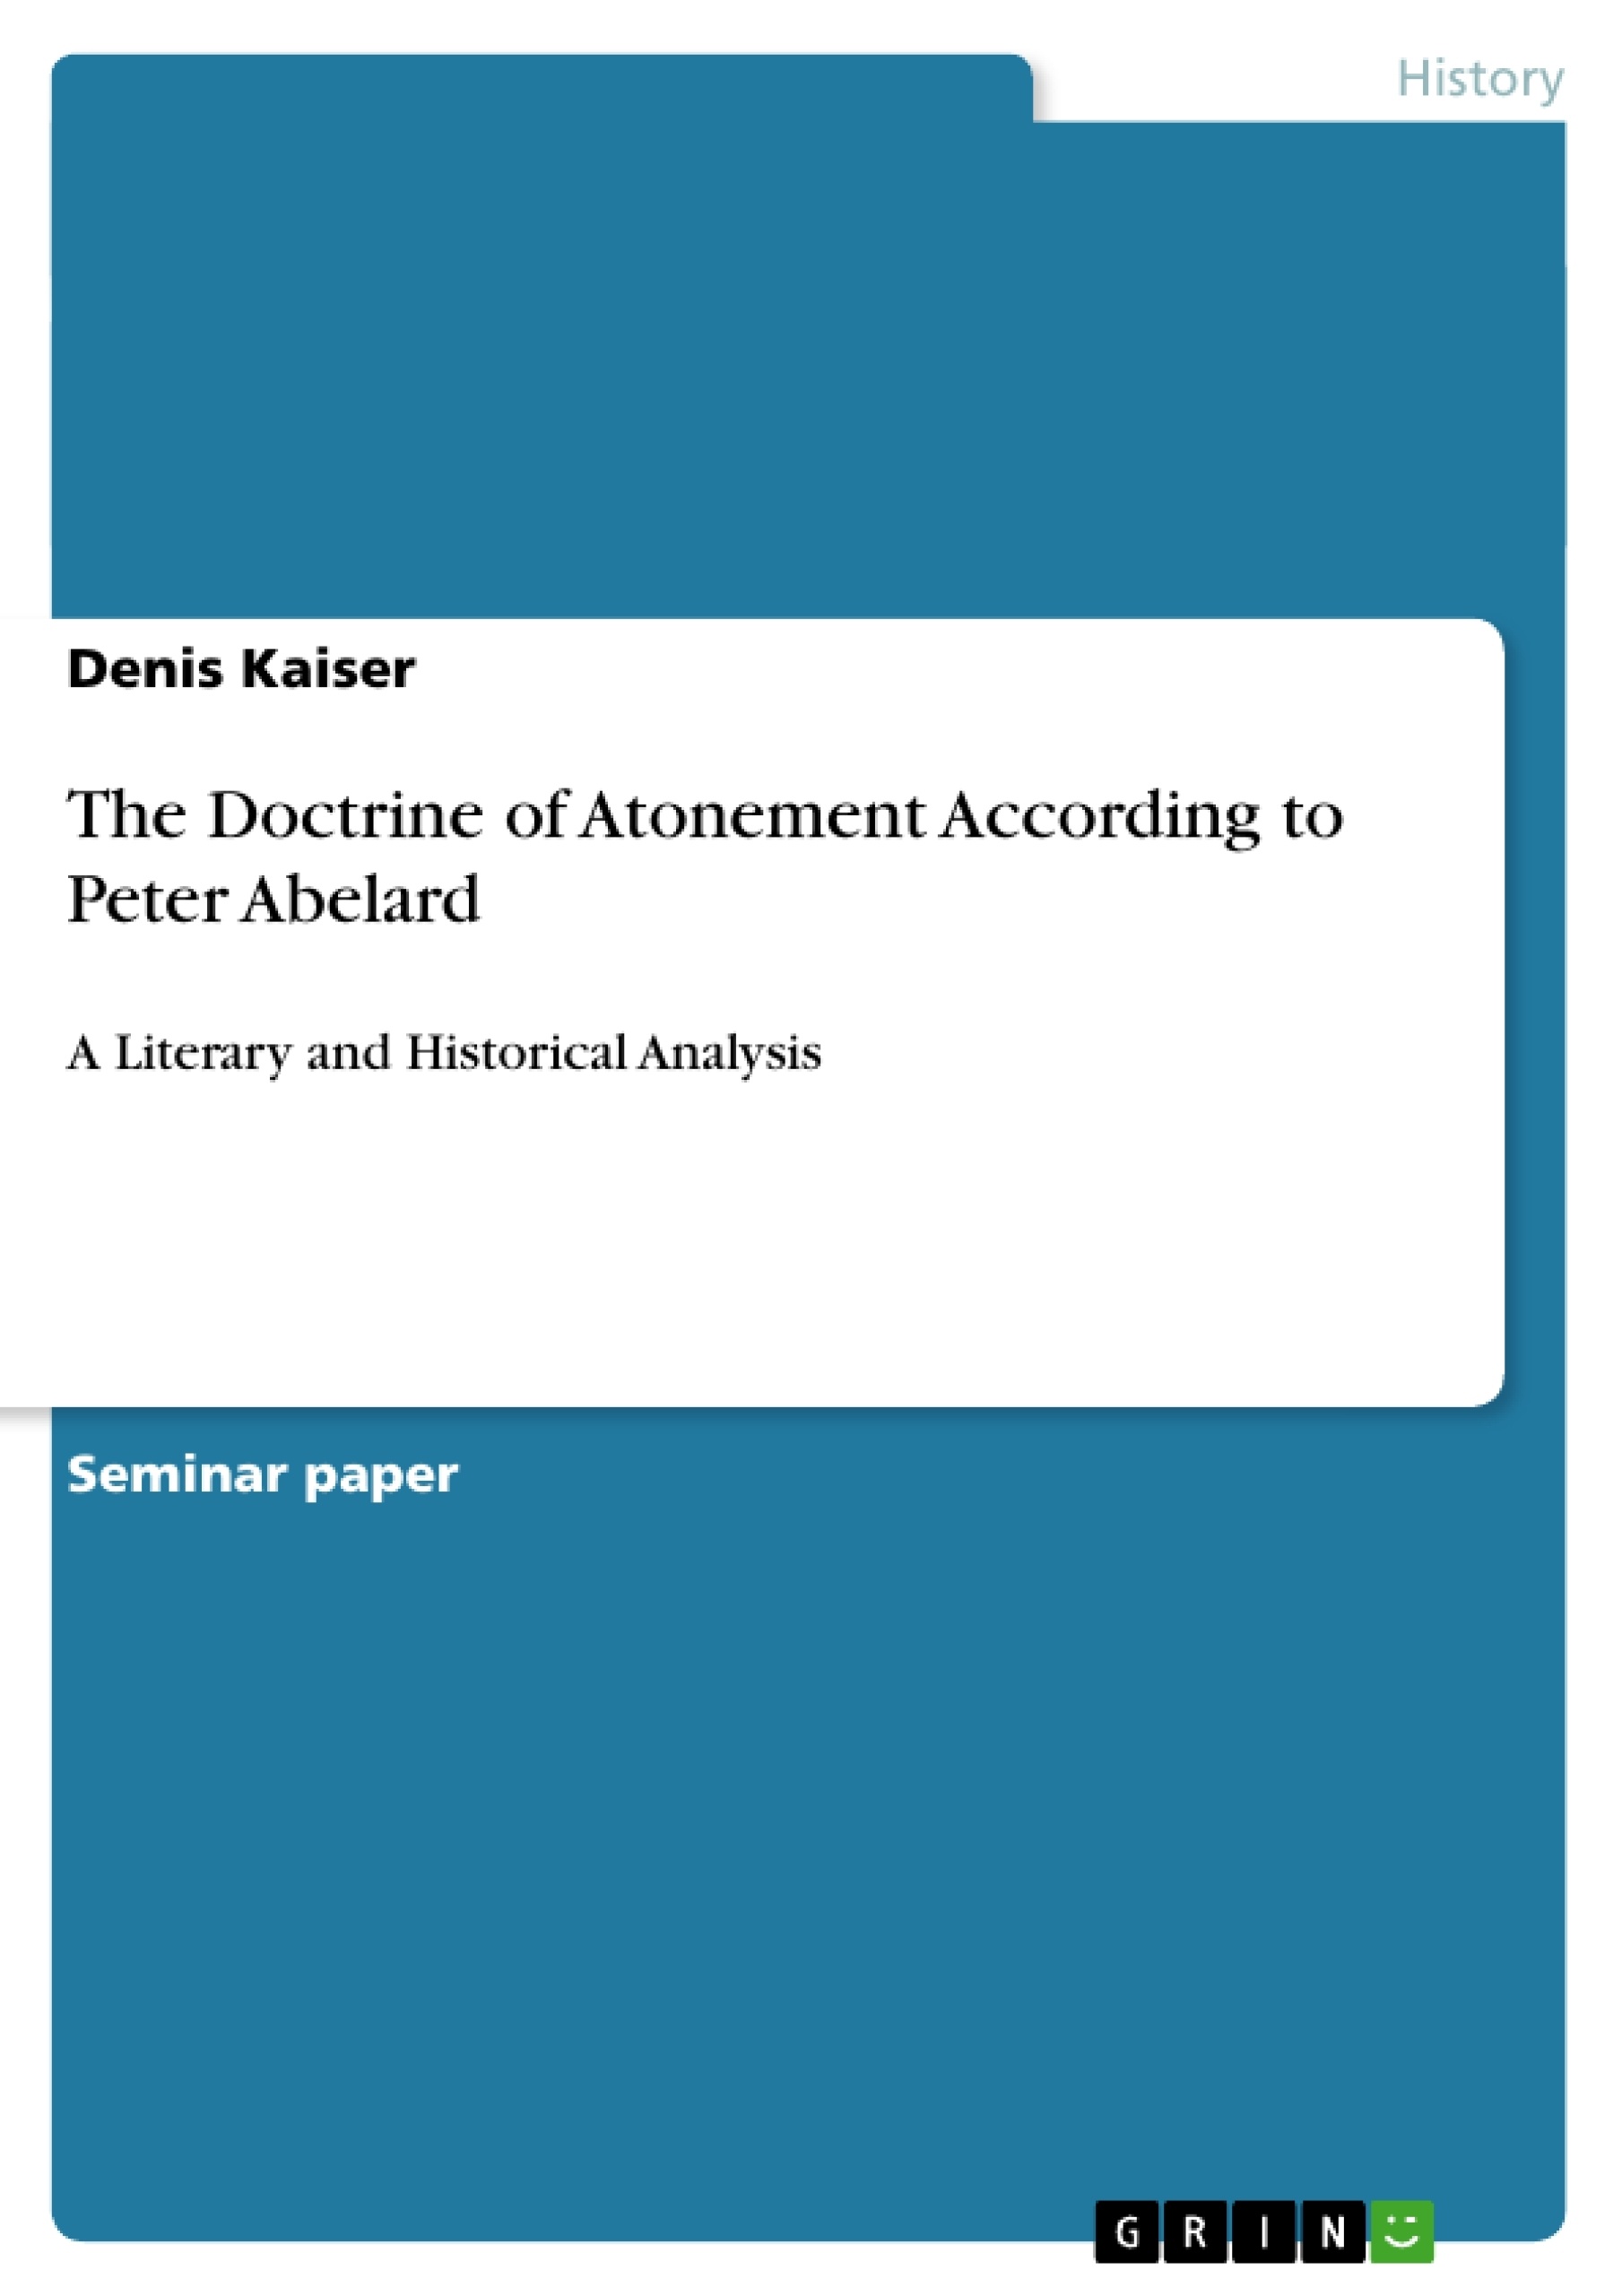 Título: The Doctrine of Atonement According to Peter Abelard